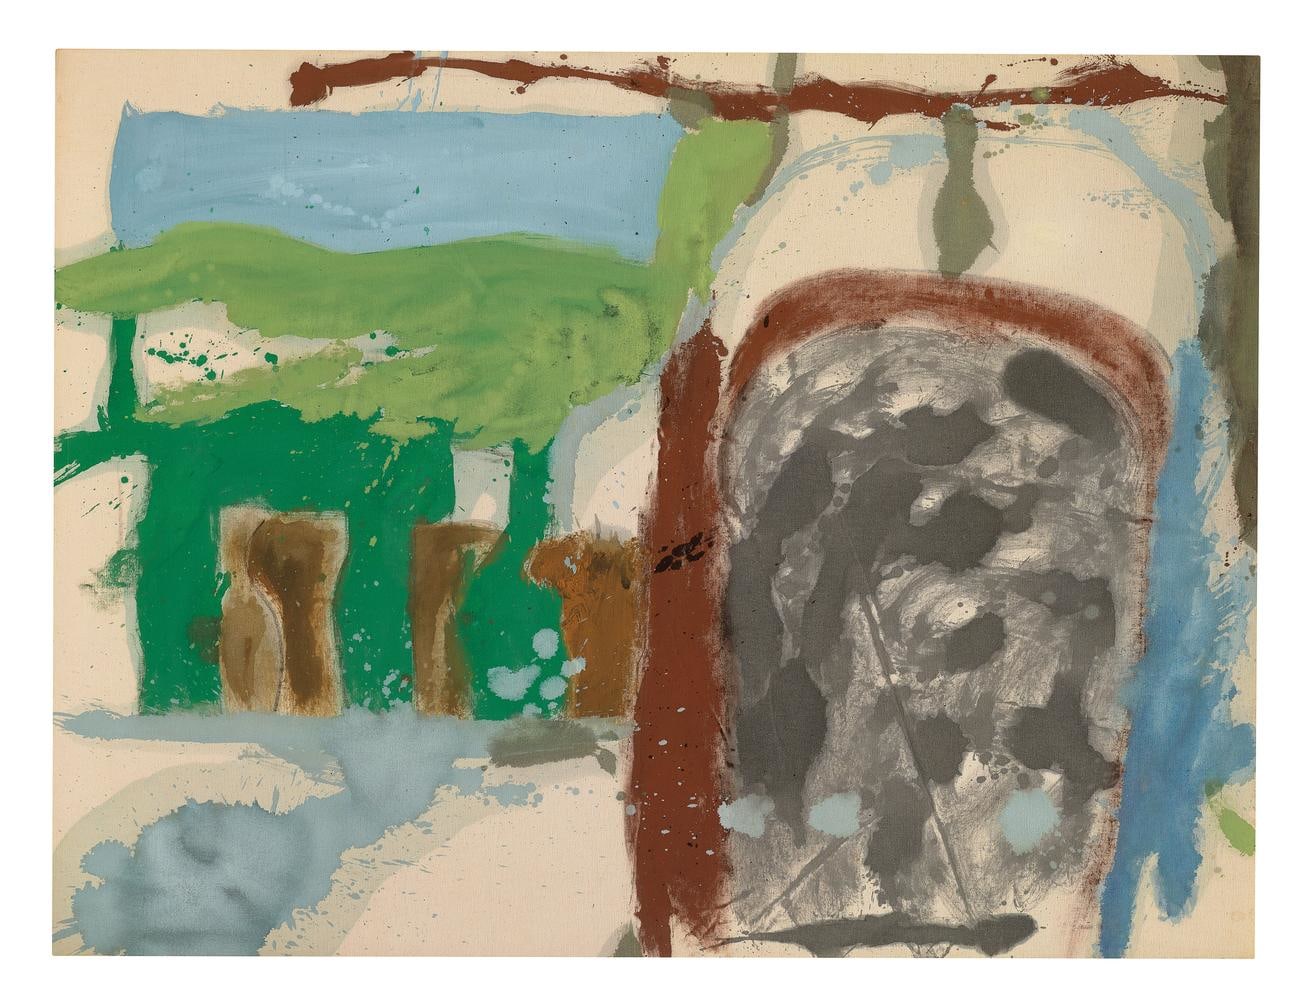 Helen Frankenthaler
Courtyard of El Greco&amp;#39;s House
1959
oil on canvas
45 3/4 x 60 1/2 inches (116.2 x 153.7 cm)&amp;nbsp;